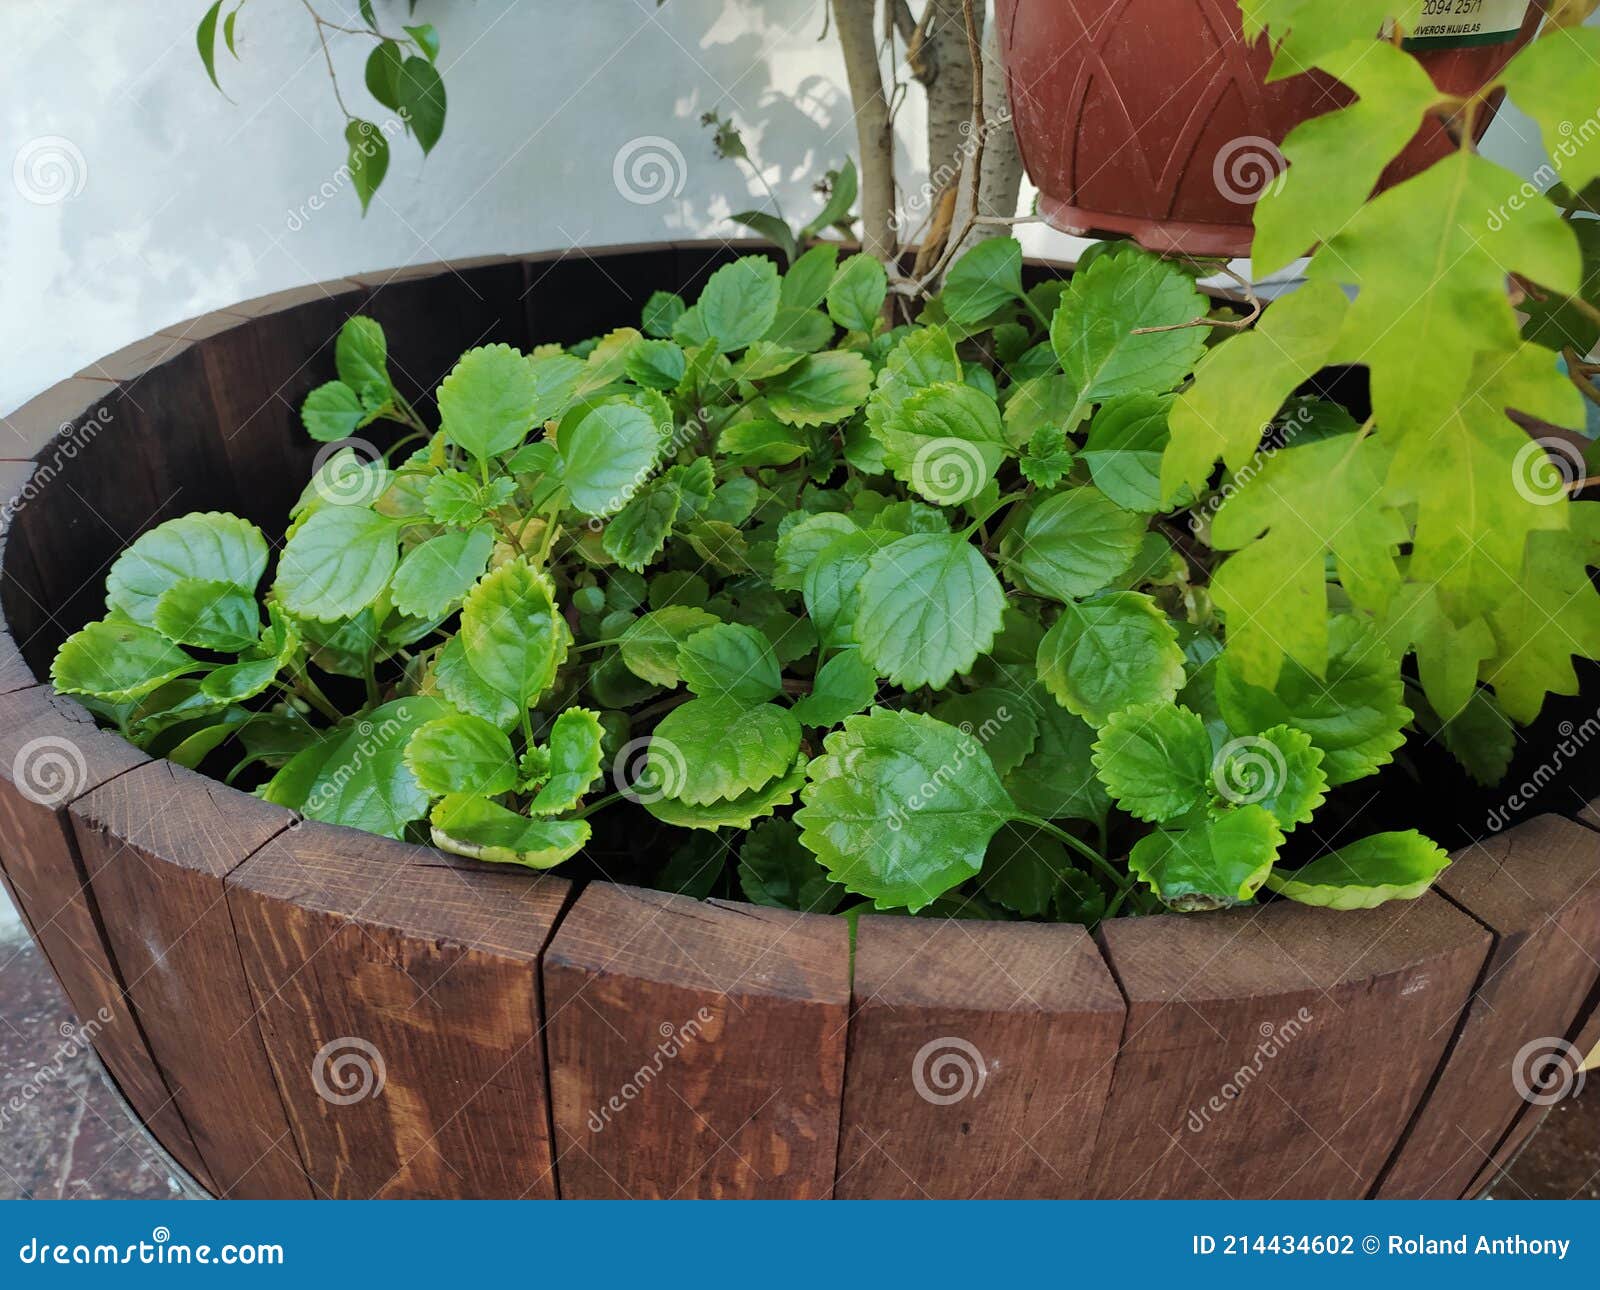 plant in a barrel